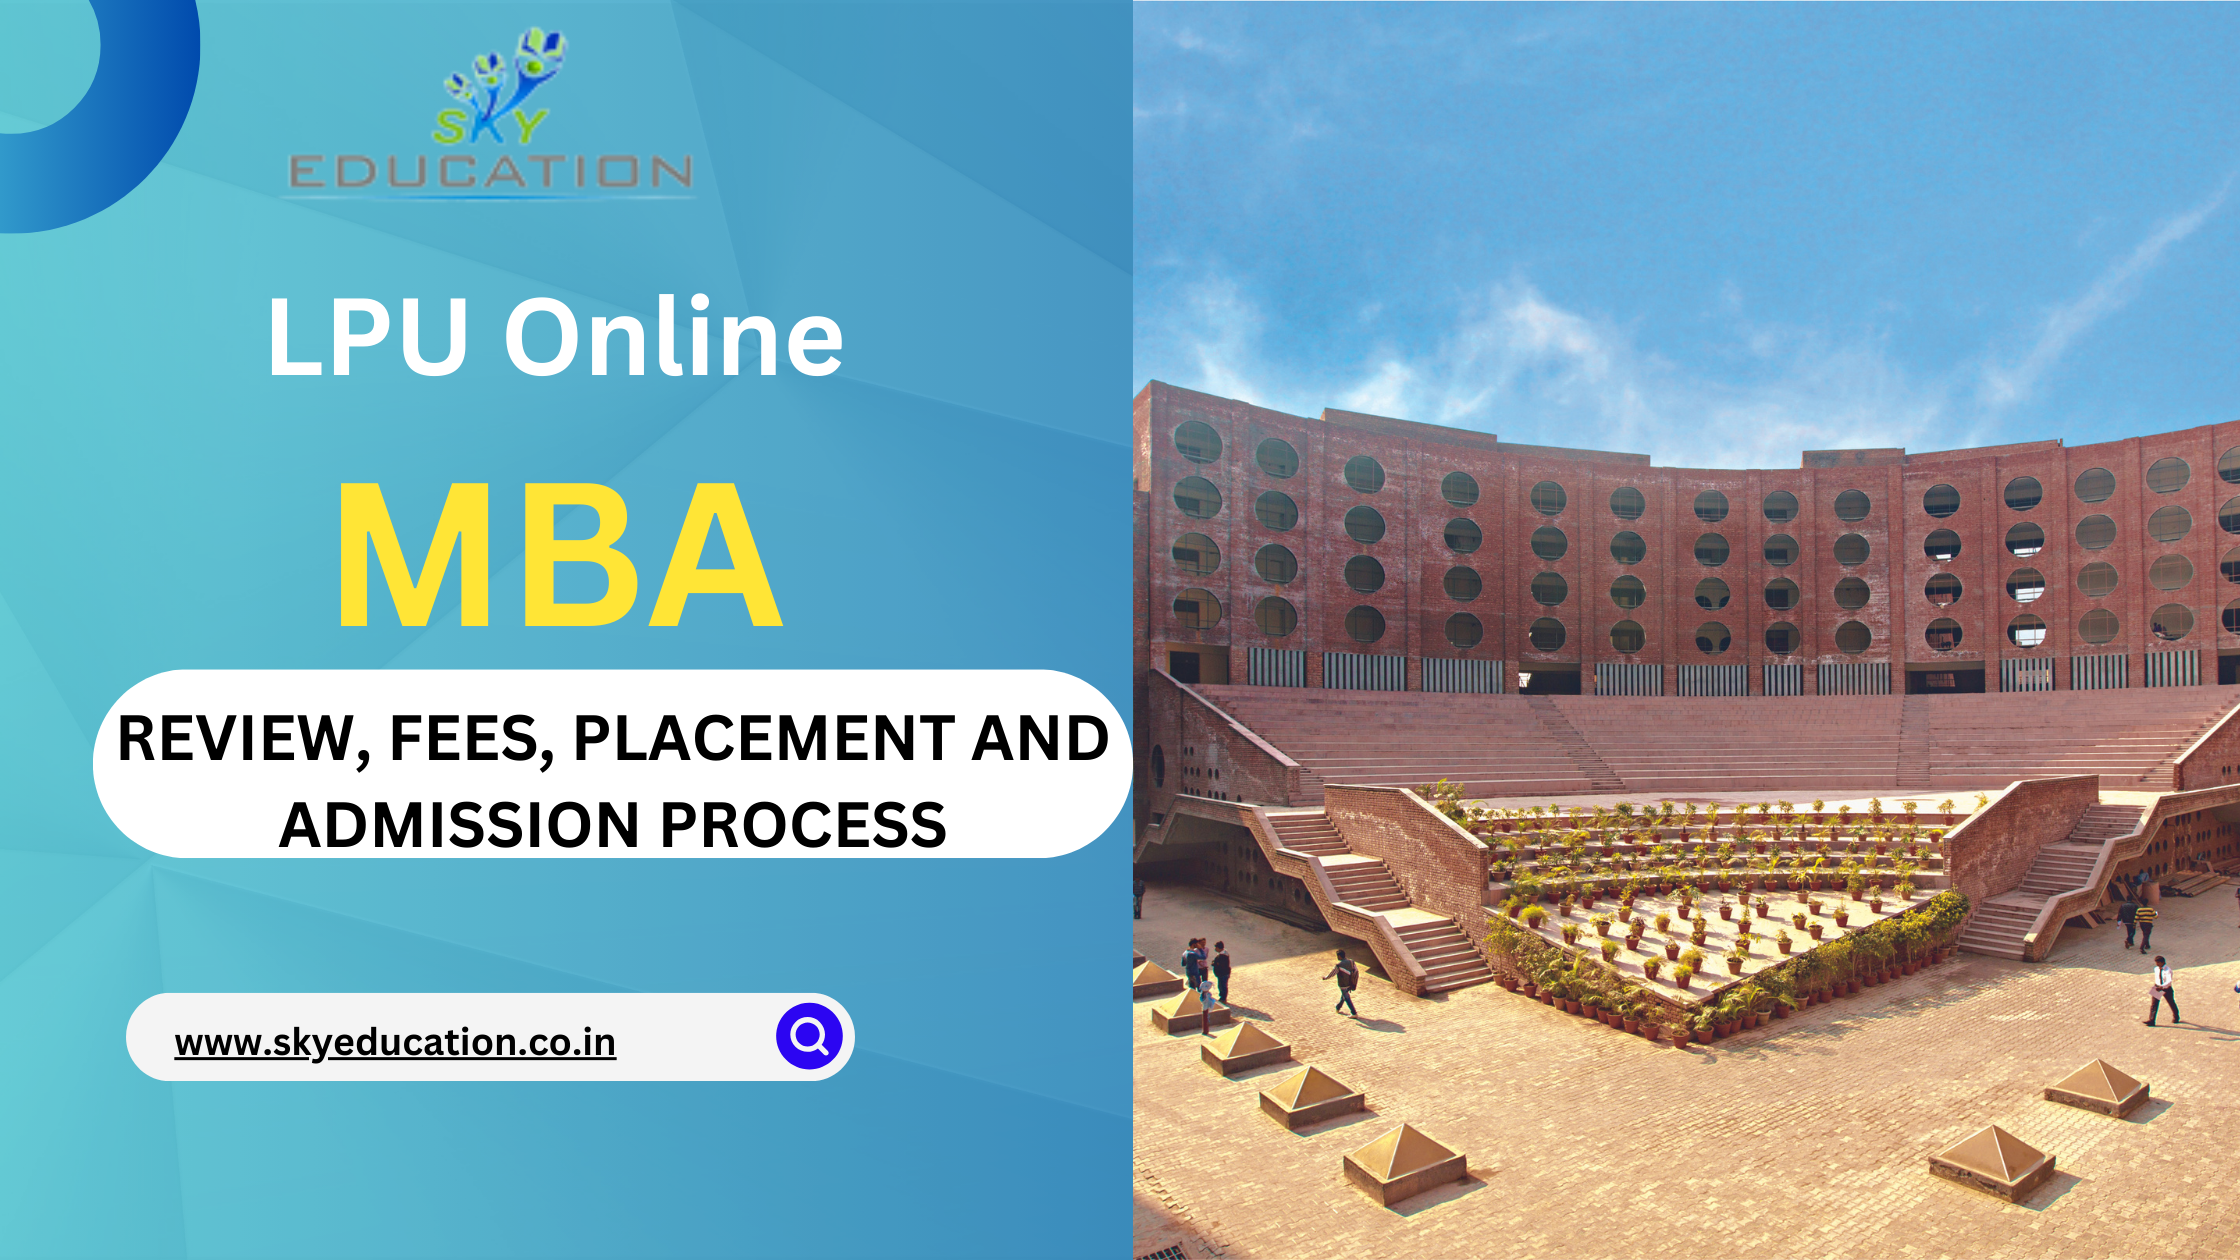 LPU Online MBA Program: Review, Fees, Placement and Admission Process